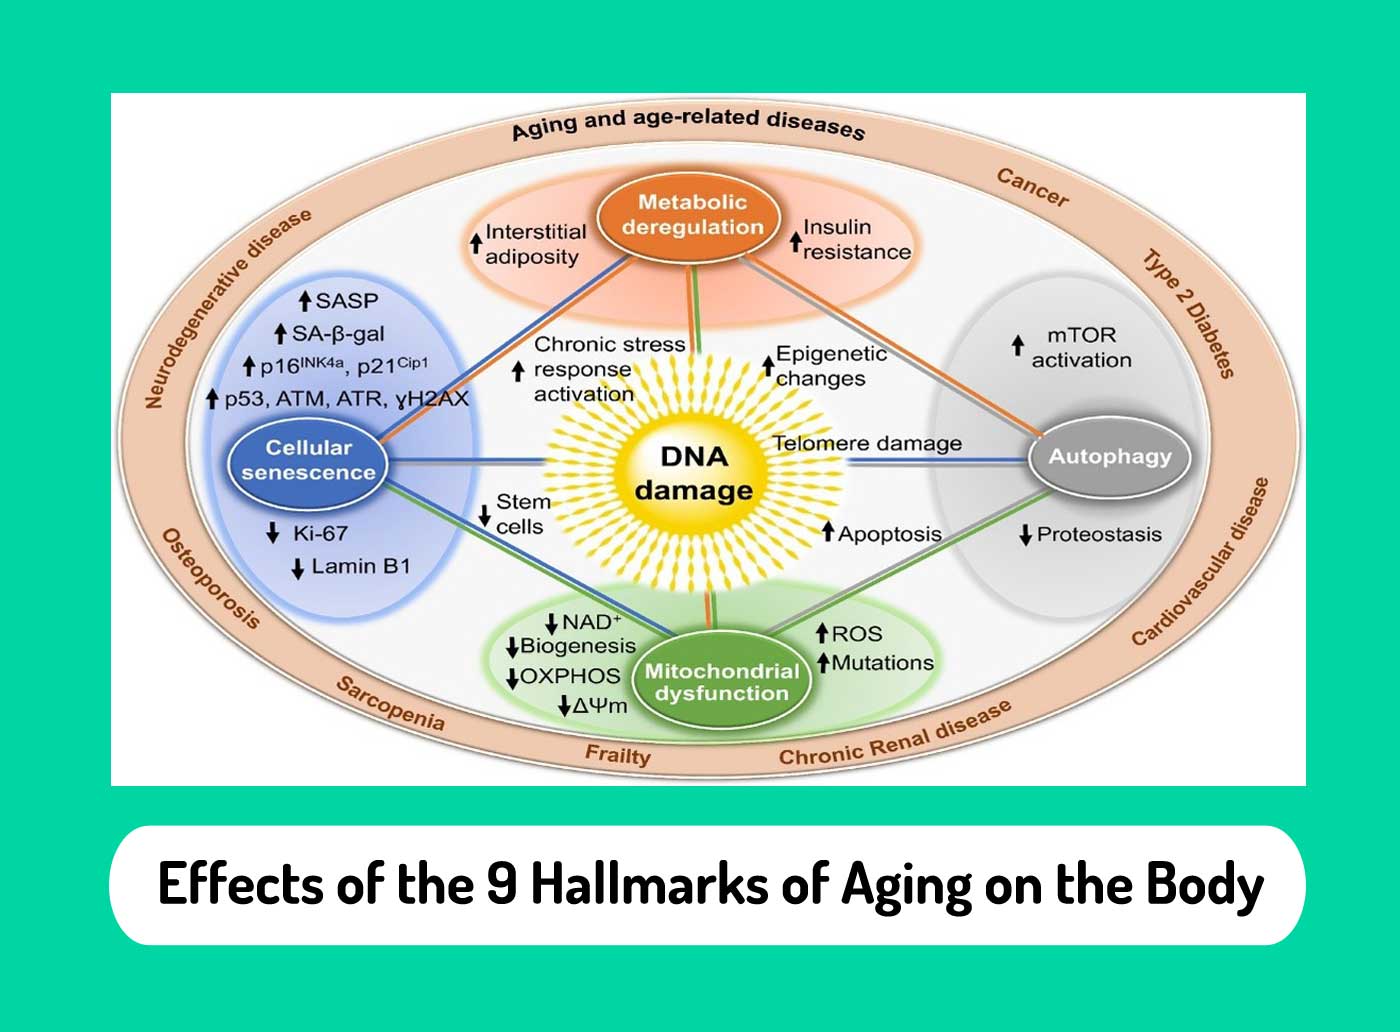 Effects of the 9 Hallmarks of Aging on the Body